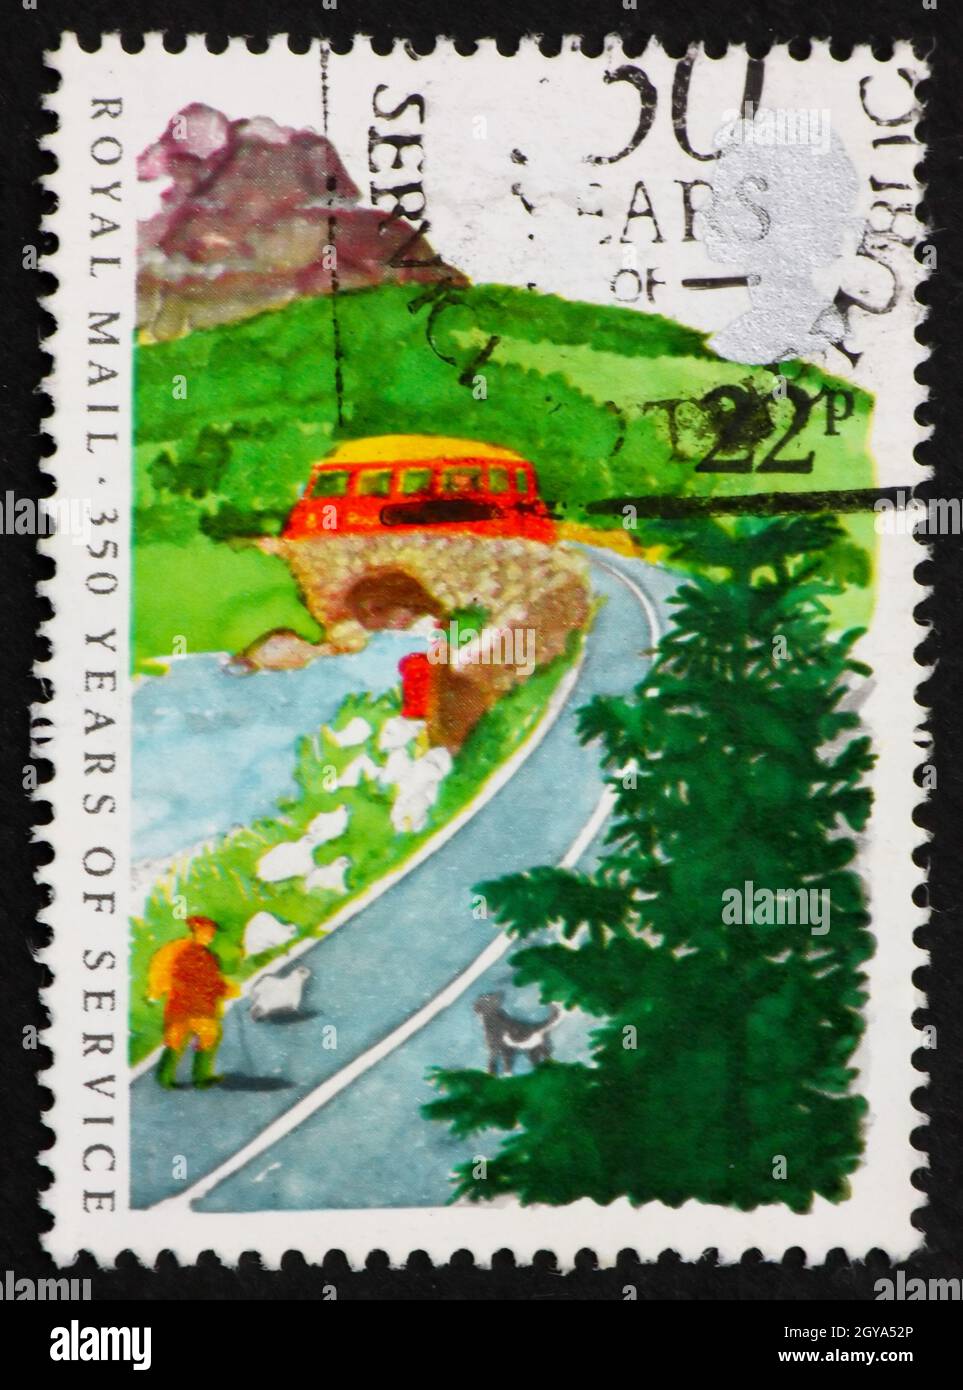 GREAT BRITAIN - CIRCA 1985: a stamp printed in Great Britain shows Postbus on Country Road, Royal Mail Service, 350th Anniversary, circa 1985 Stock Photo